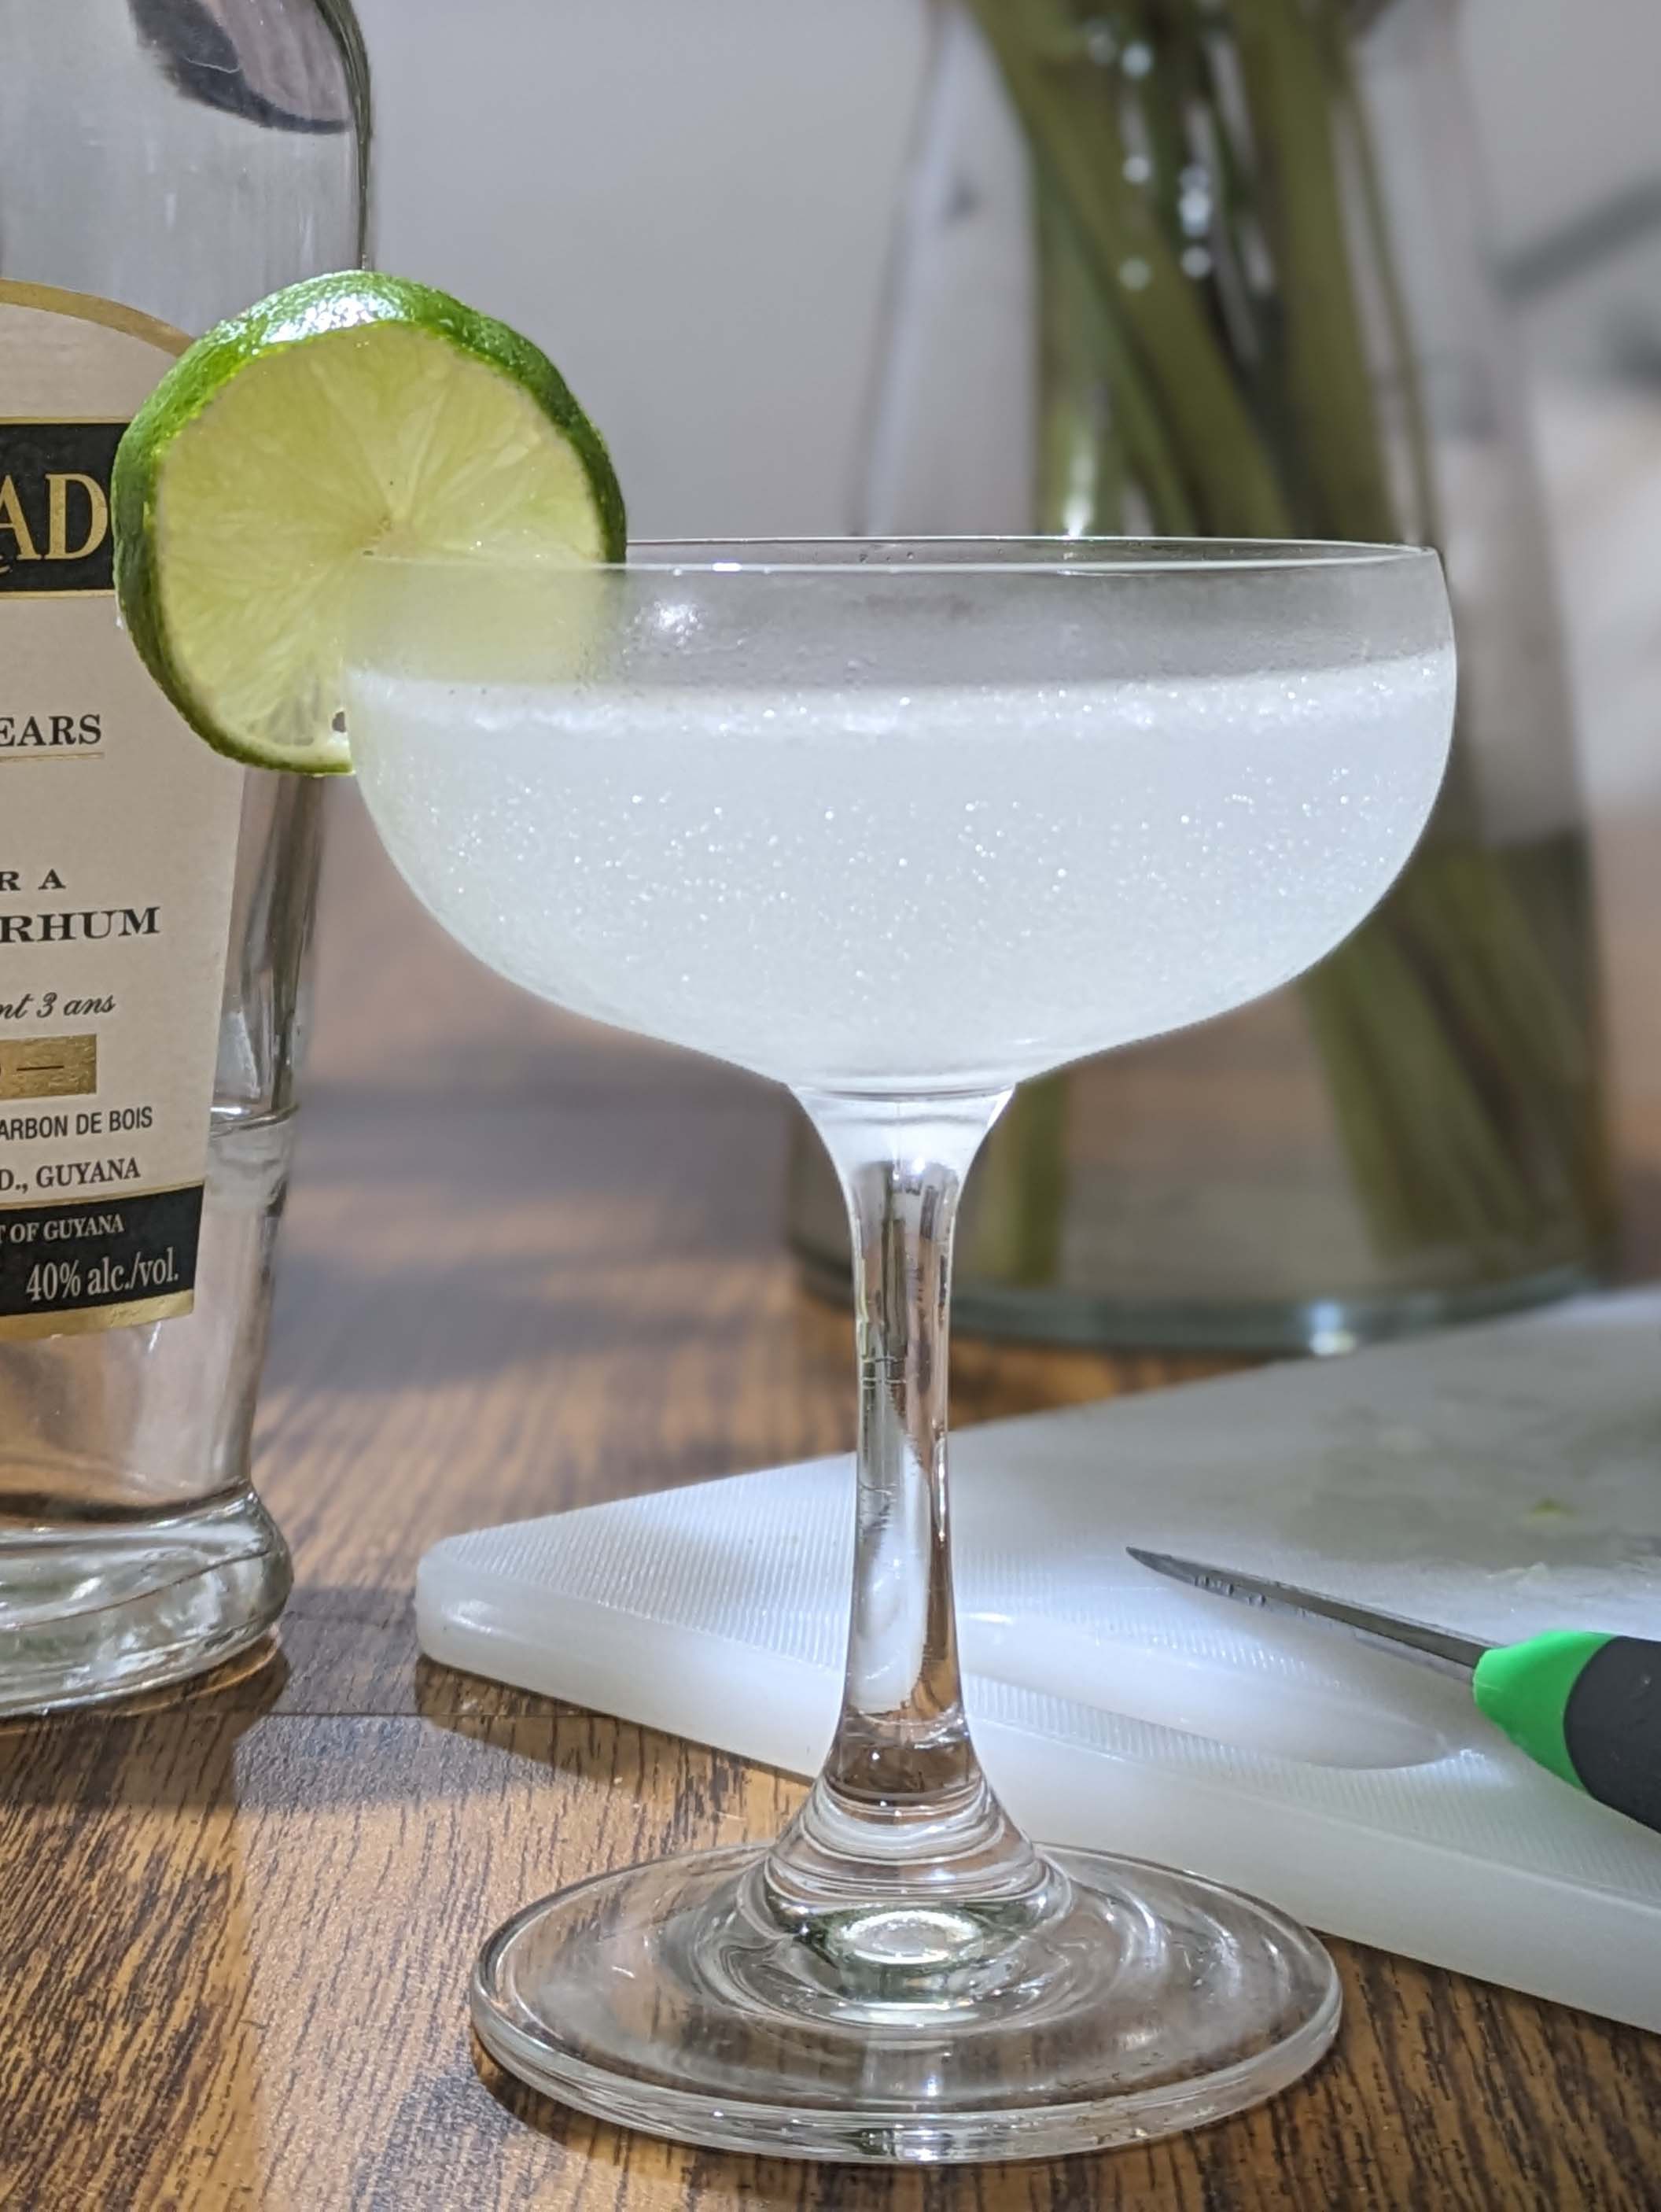 A bottle of El Dorado rum and a cutting board with half a lime stand behind a glass containing a light yellow liquid and garnished with a lime wheel.